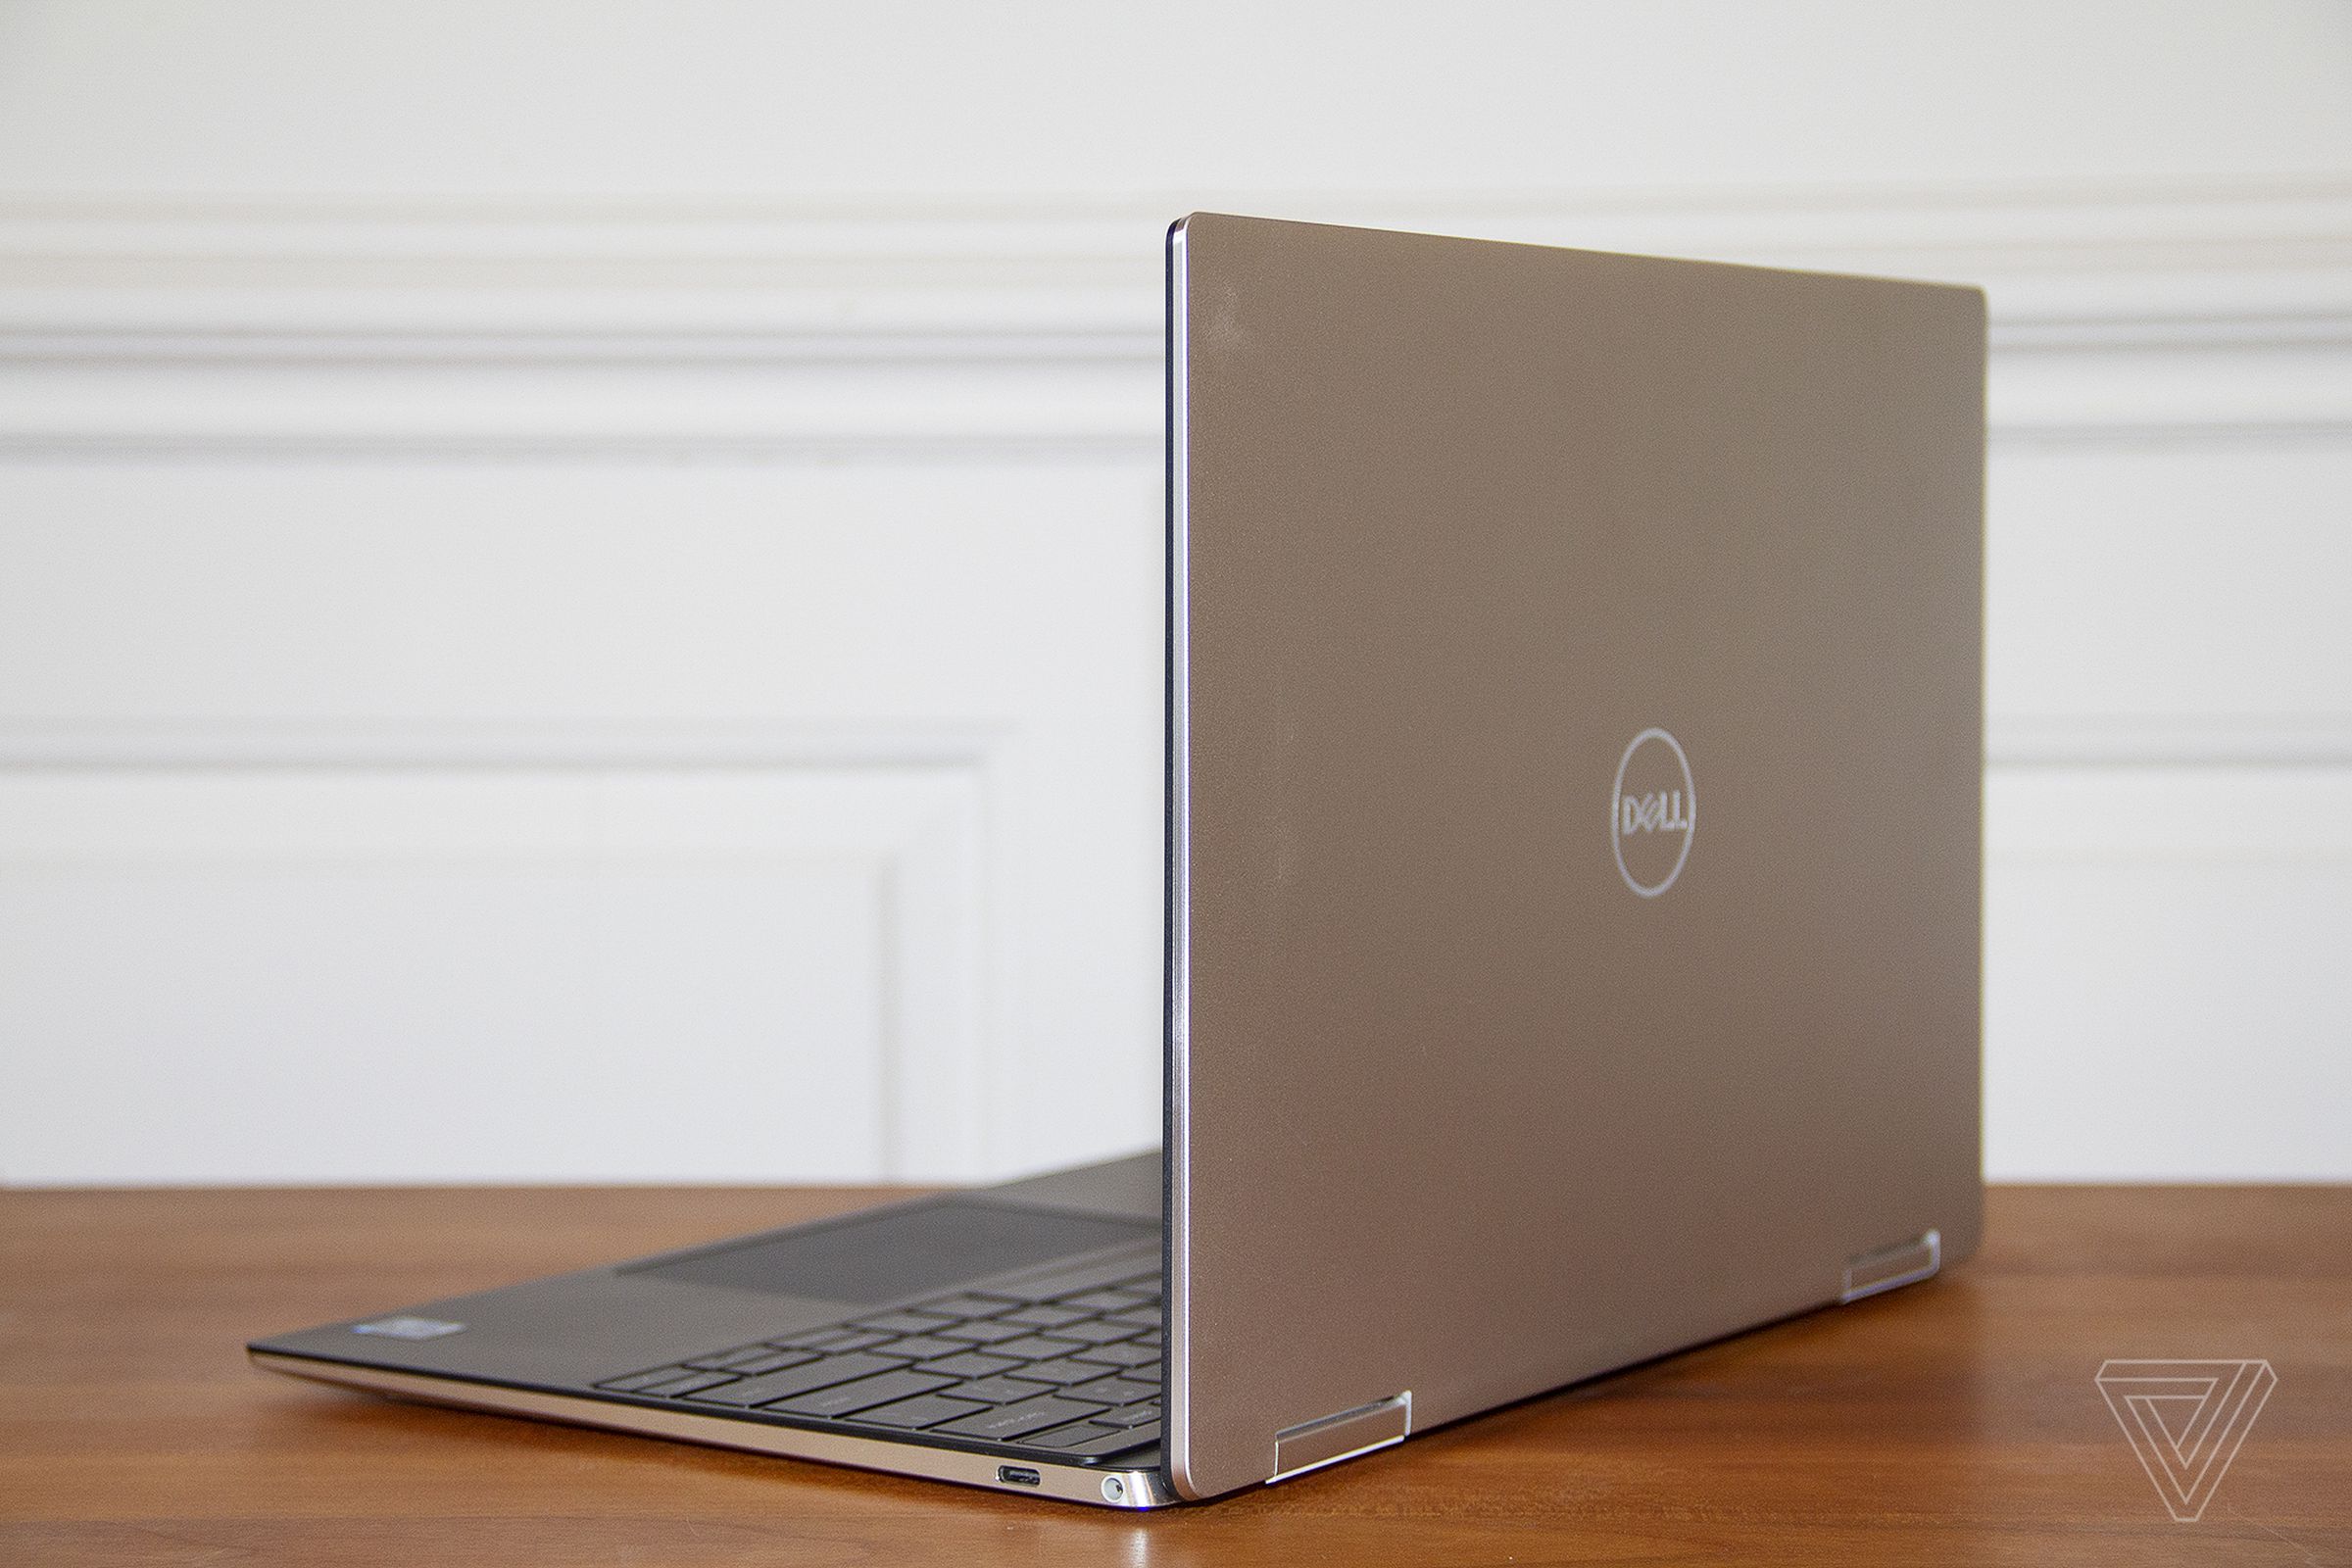 The Dell XPS 13 2-in-1 from the back, angled to the left.